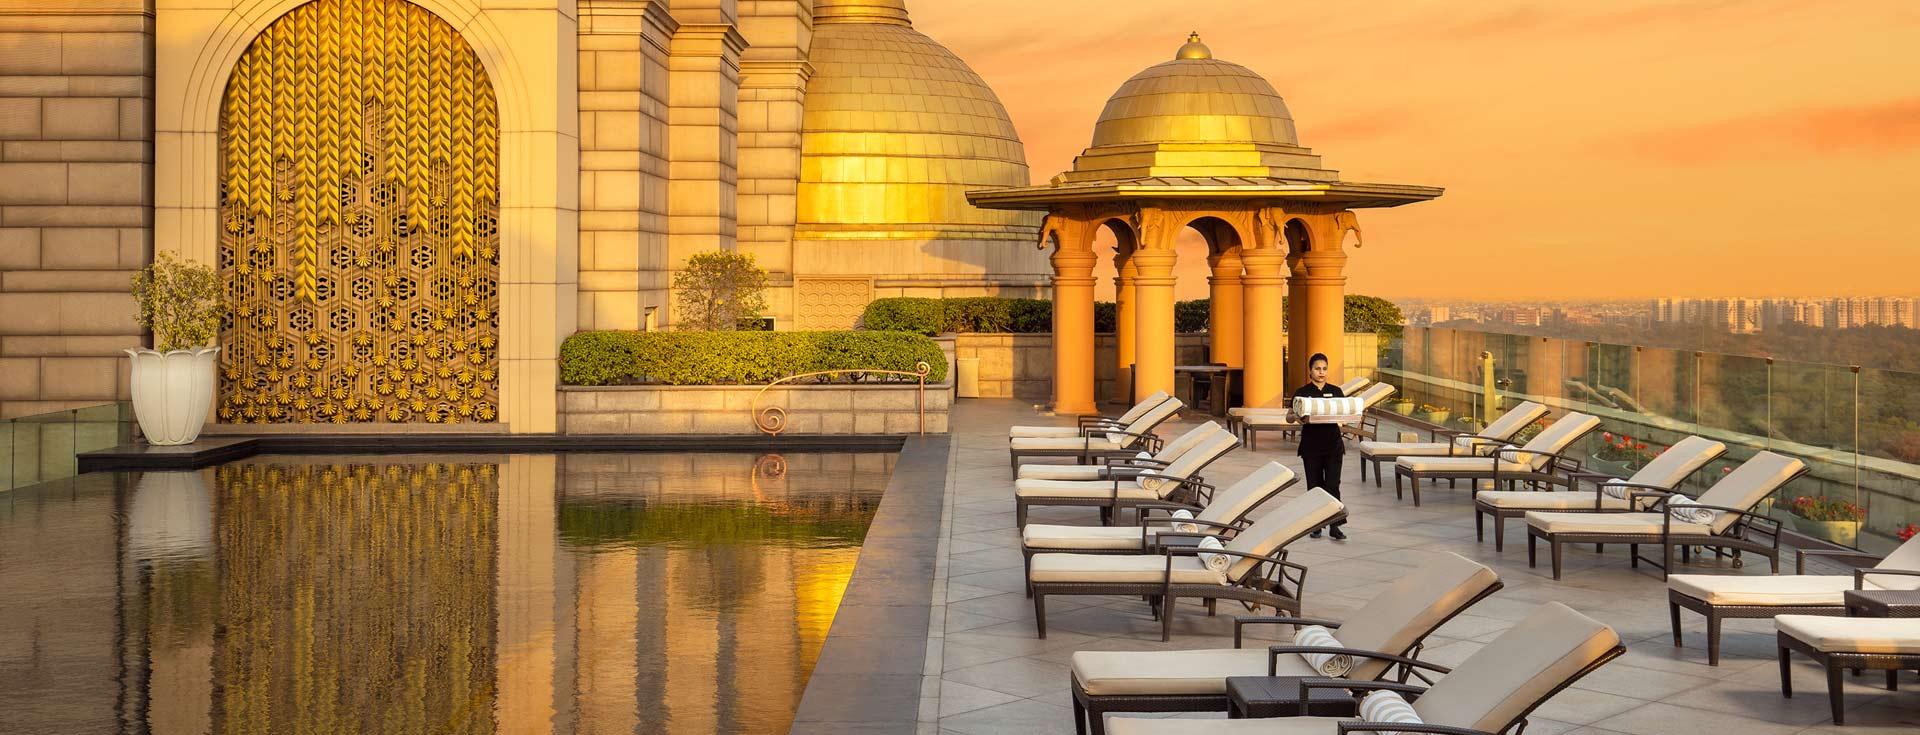 Leela Palace New Delhi IndiaNorther